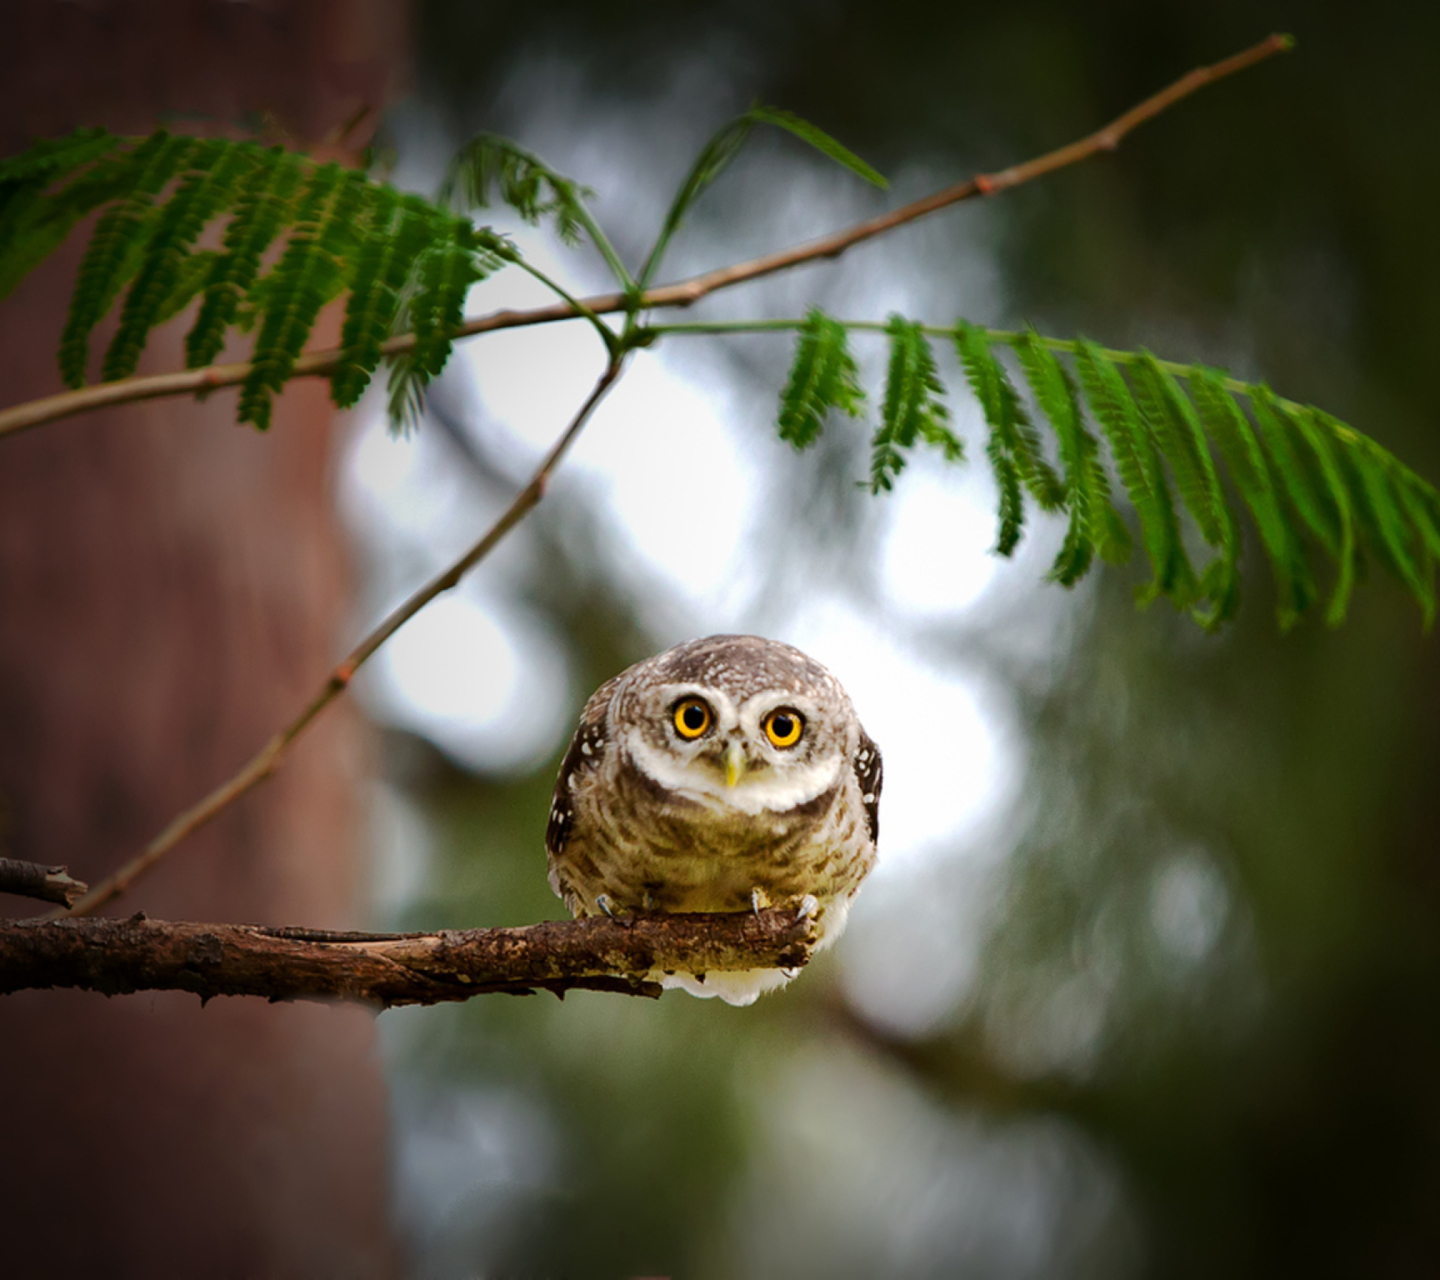 Cute And Funny Little Owl With Big Eyes wallpaper 1440x1280